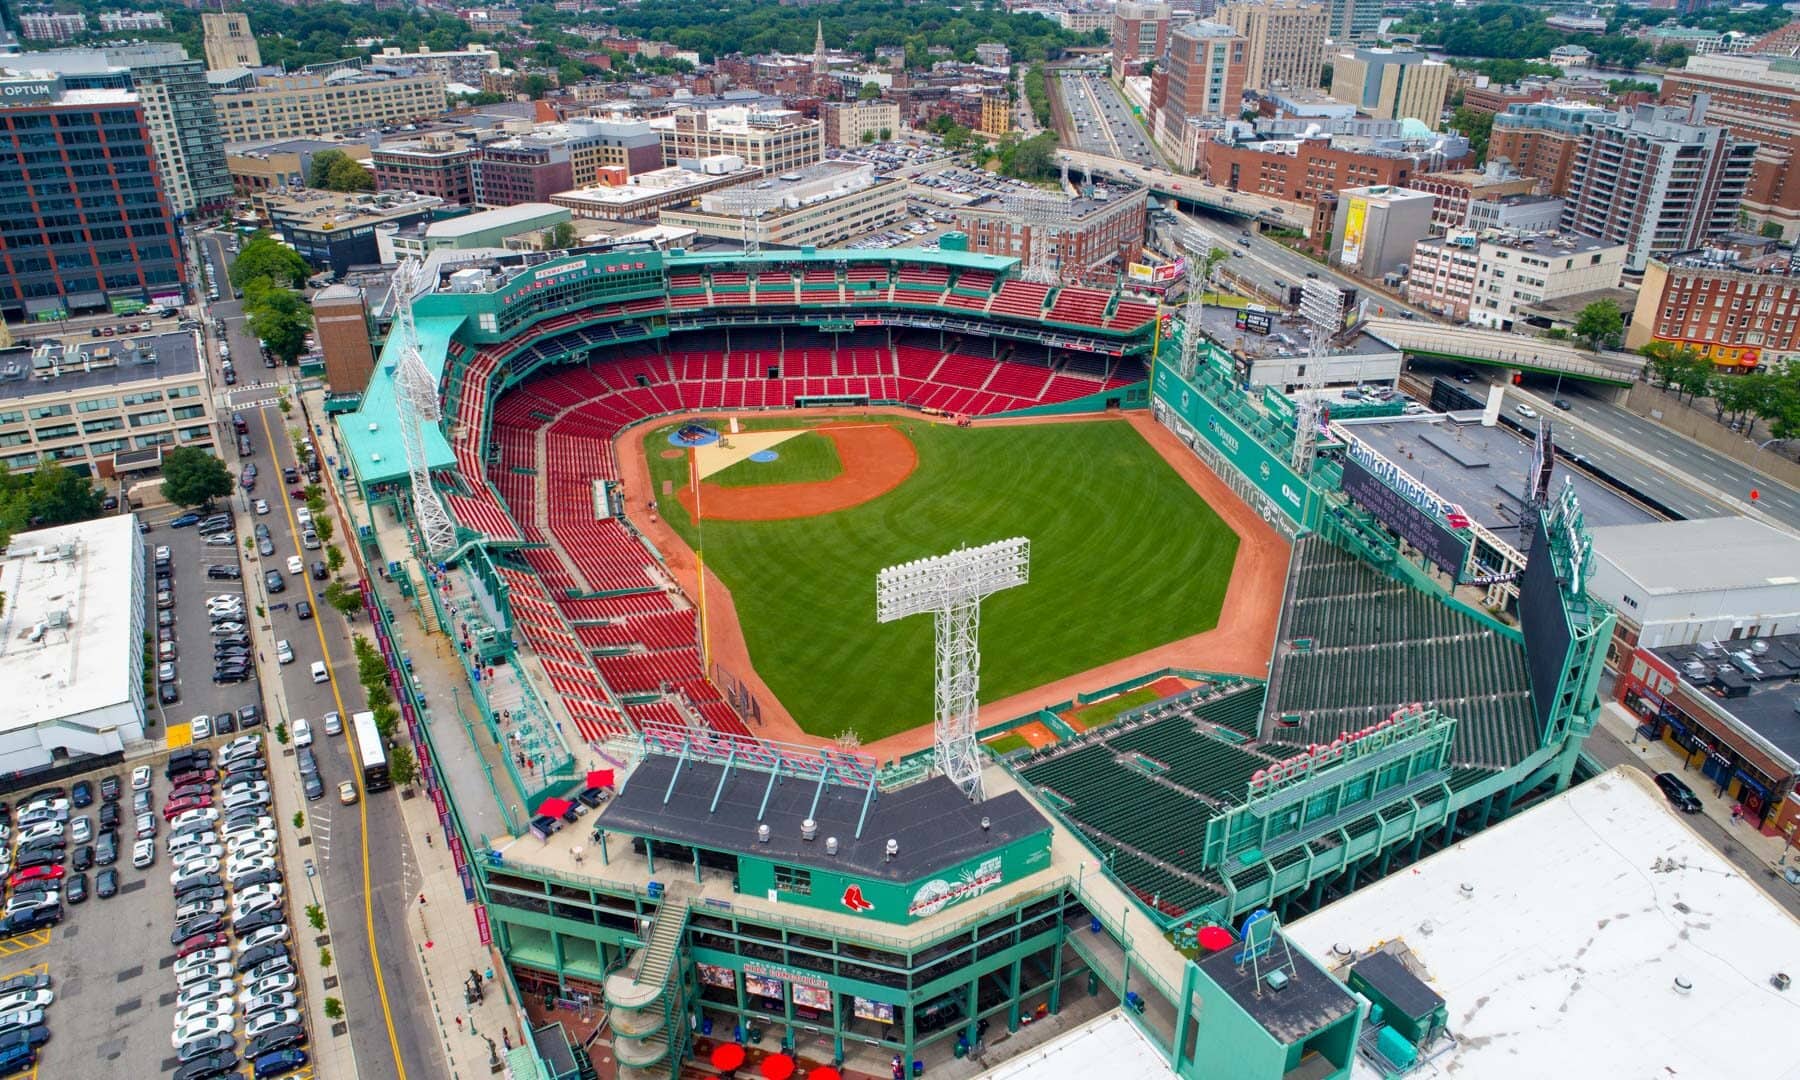 Looking For Condos in Fenway/Kenmore? Our Top 7 New Building Picks